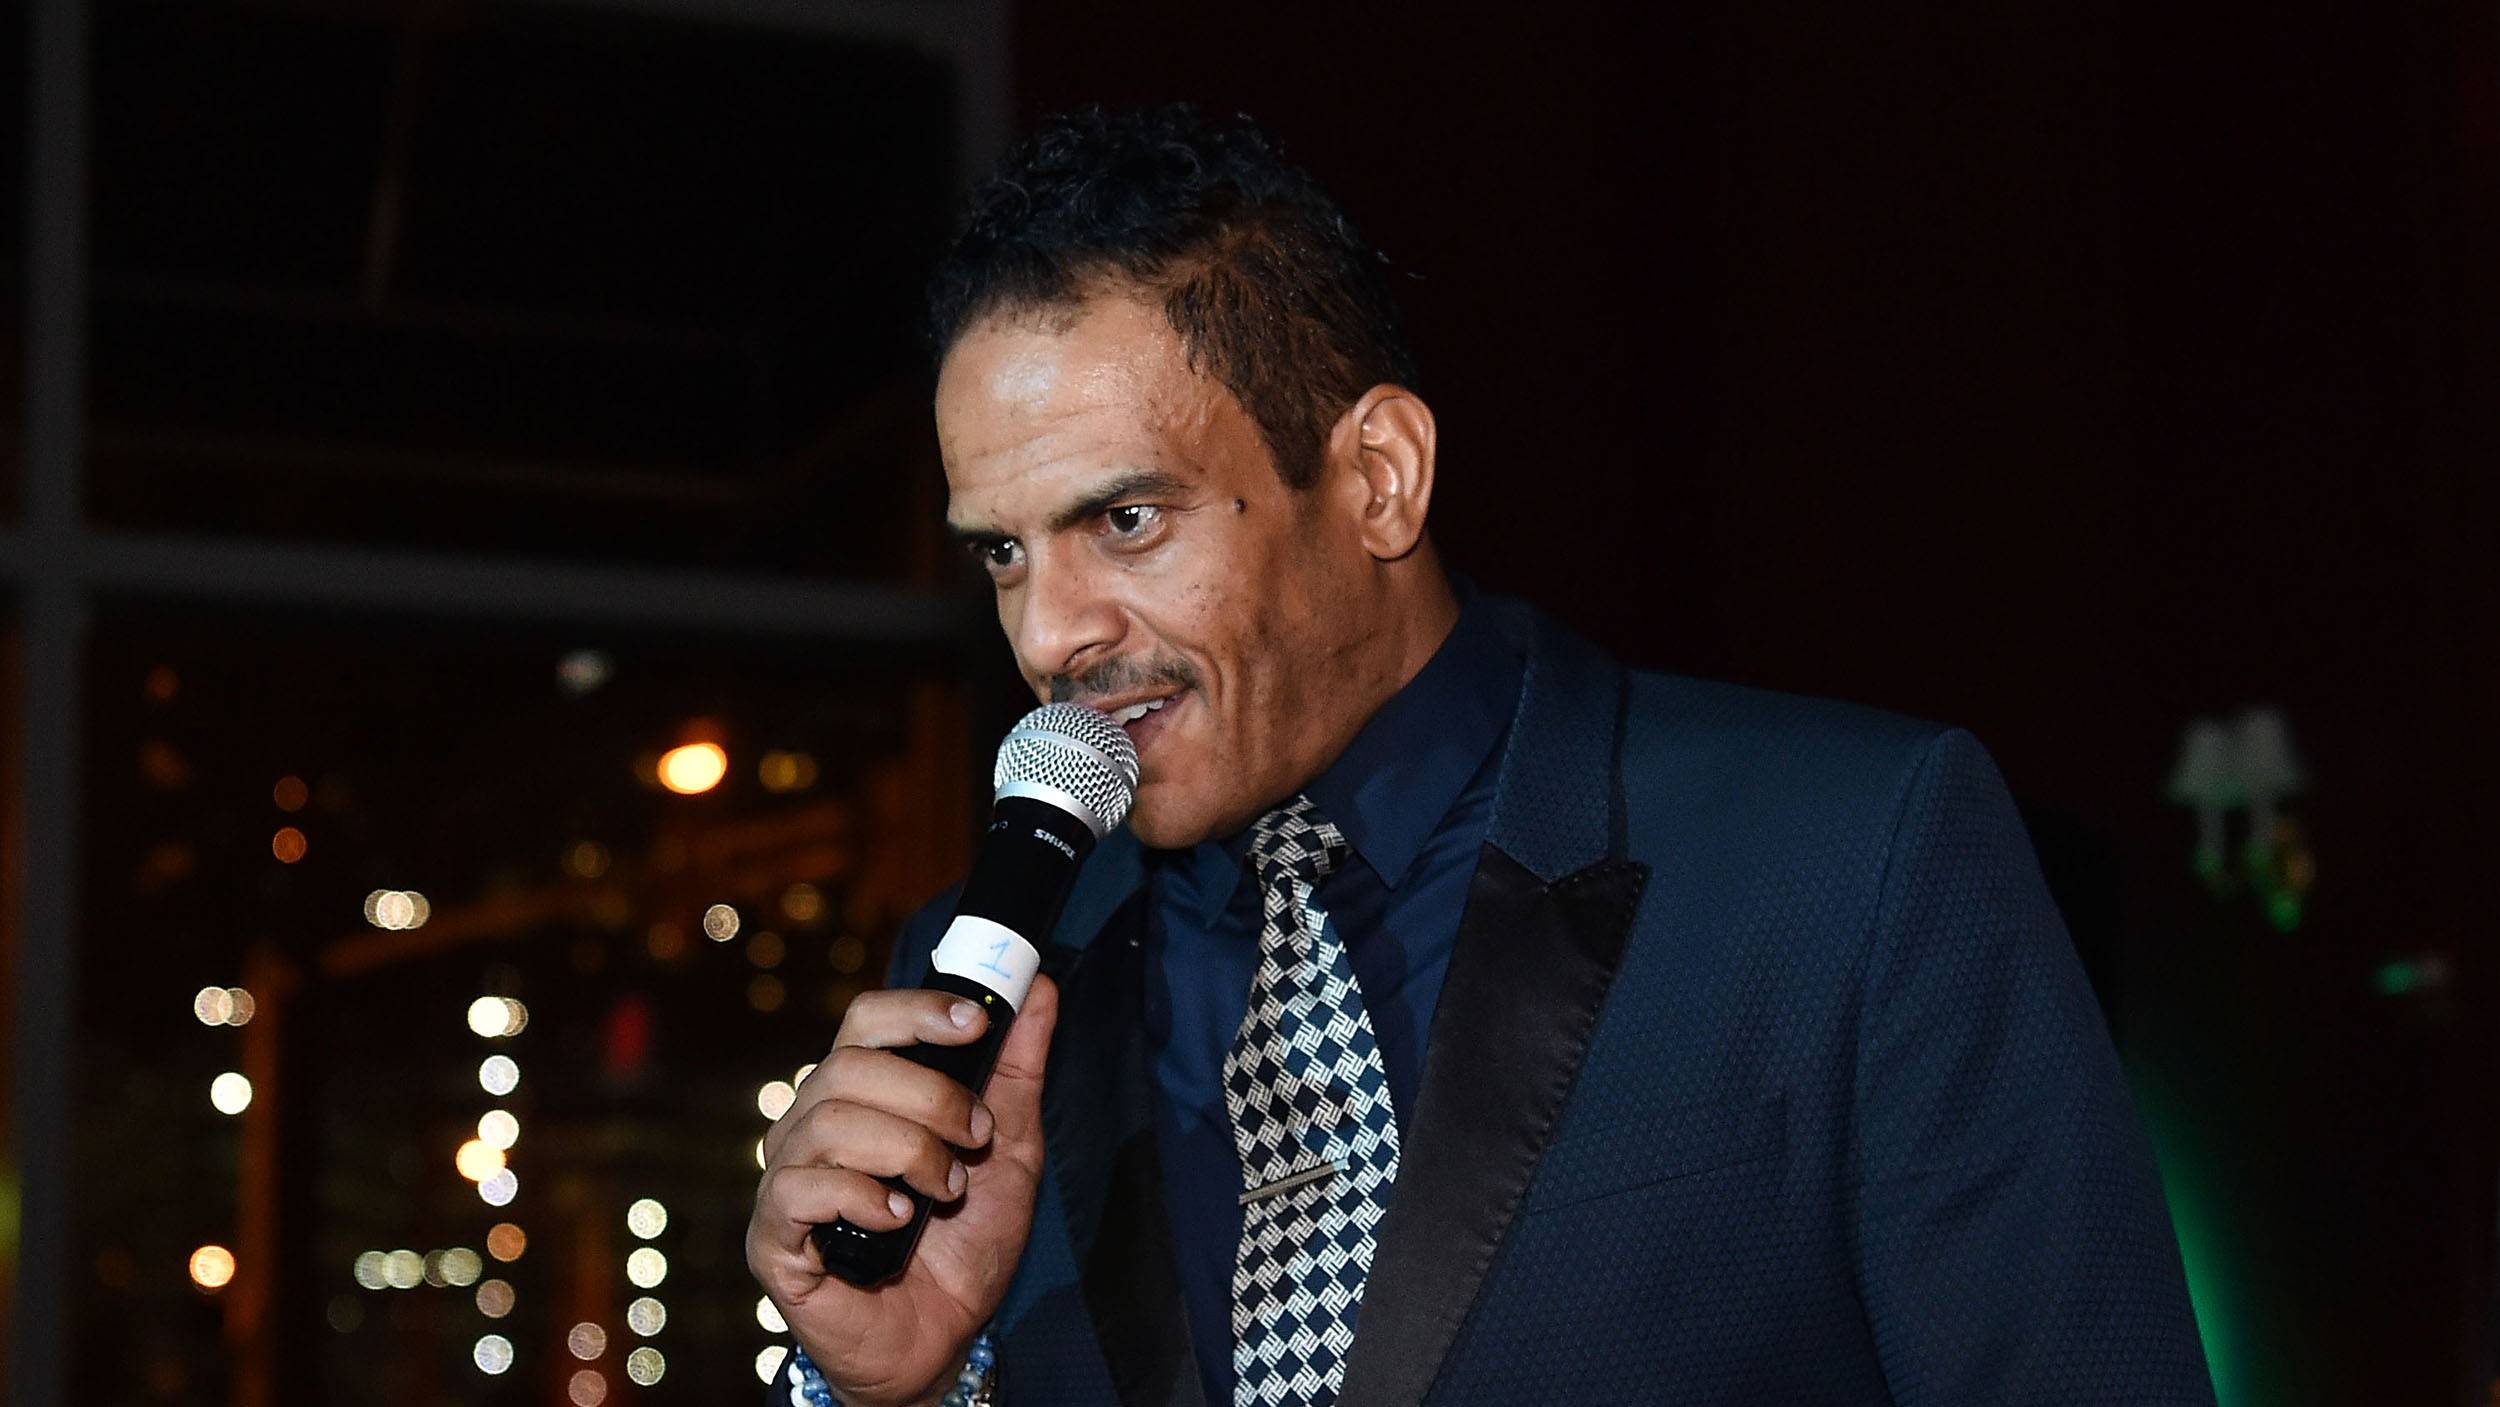 R&B Legend Christopher Williams Is Not In A Coma, Despite Social Media